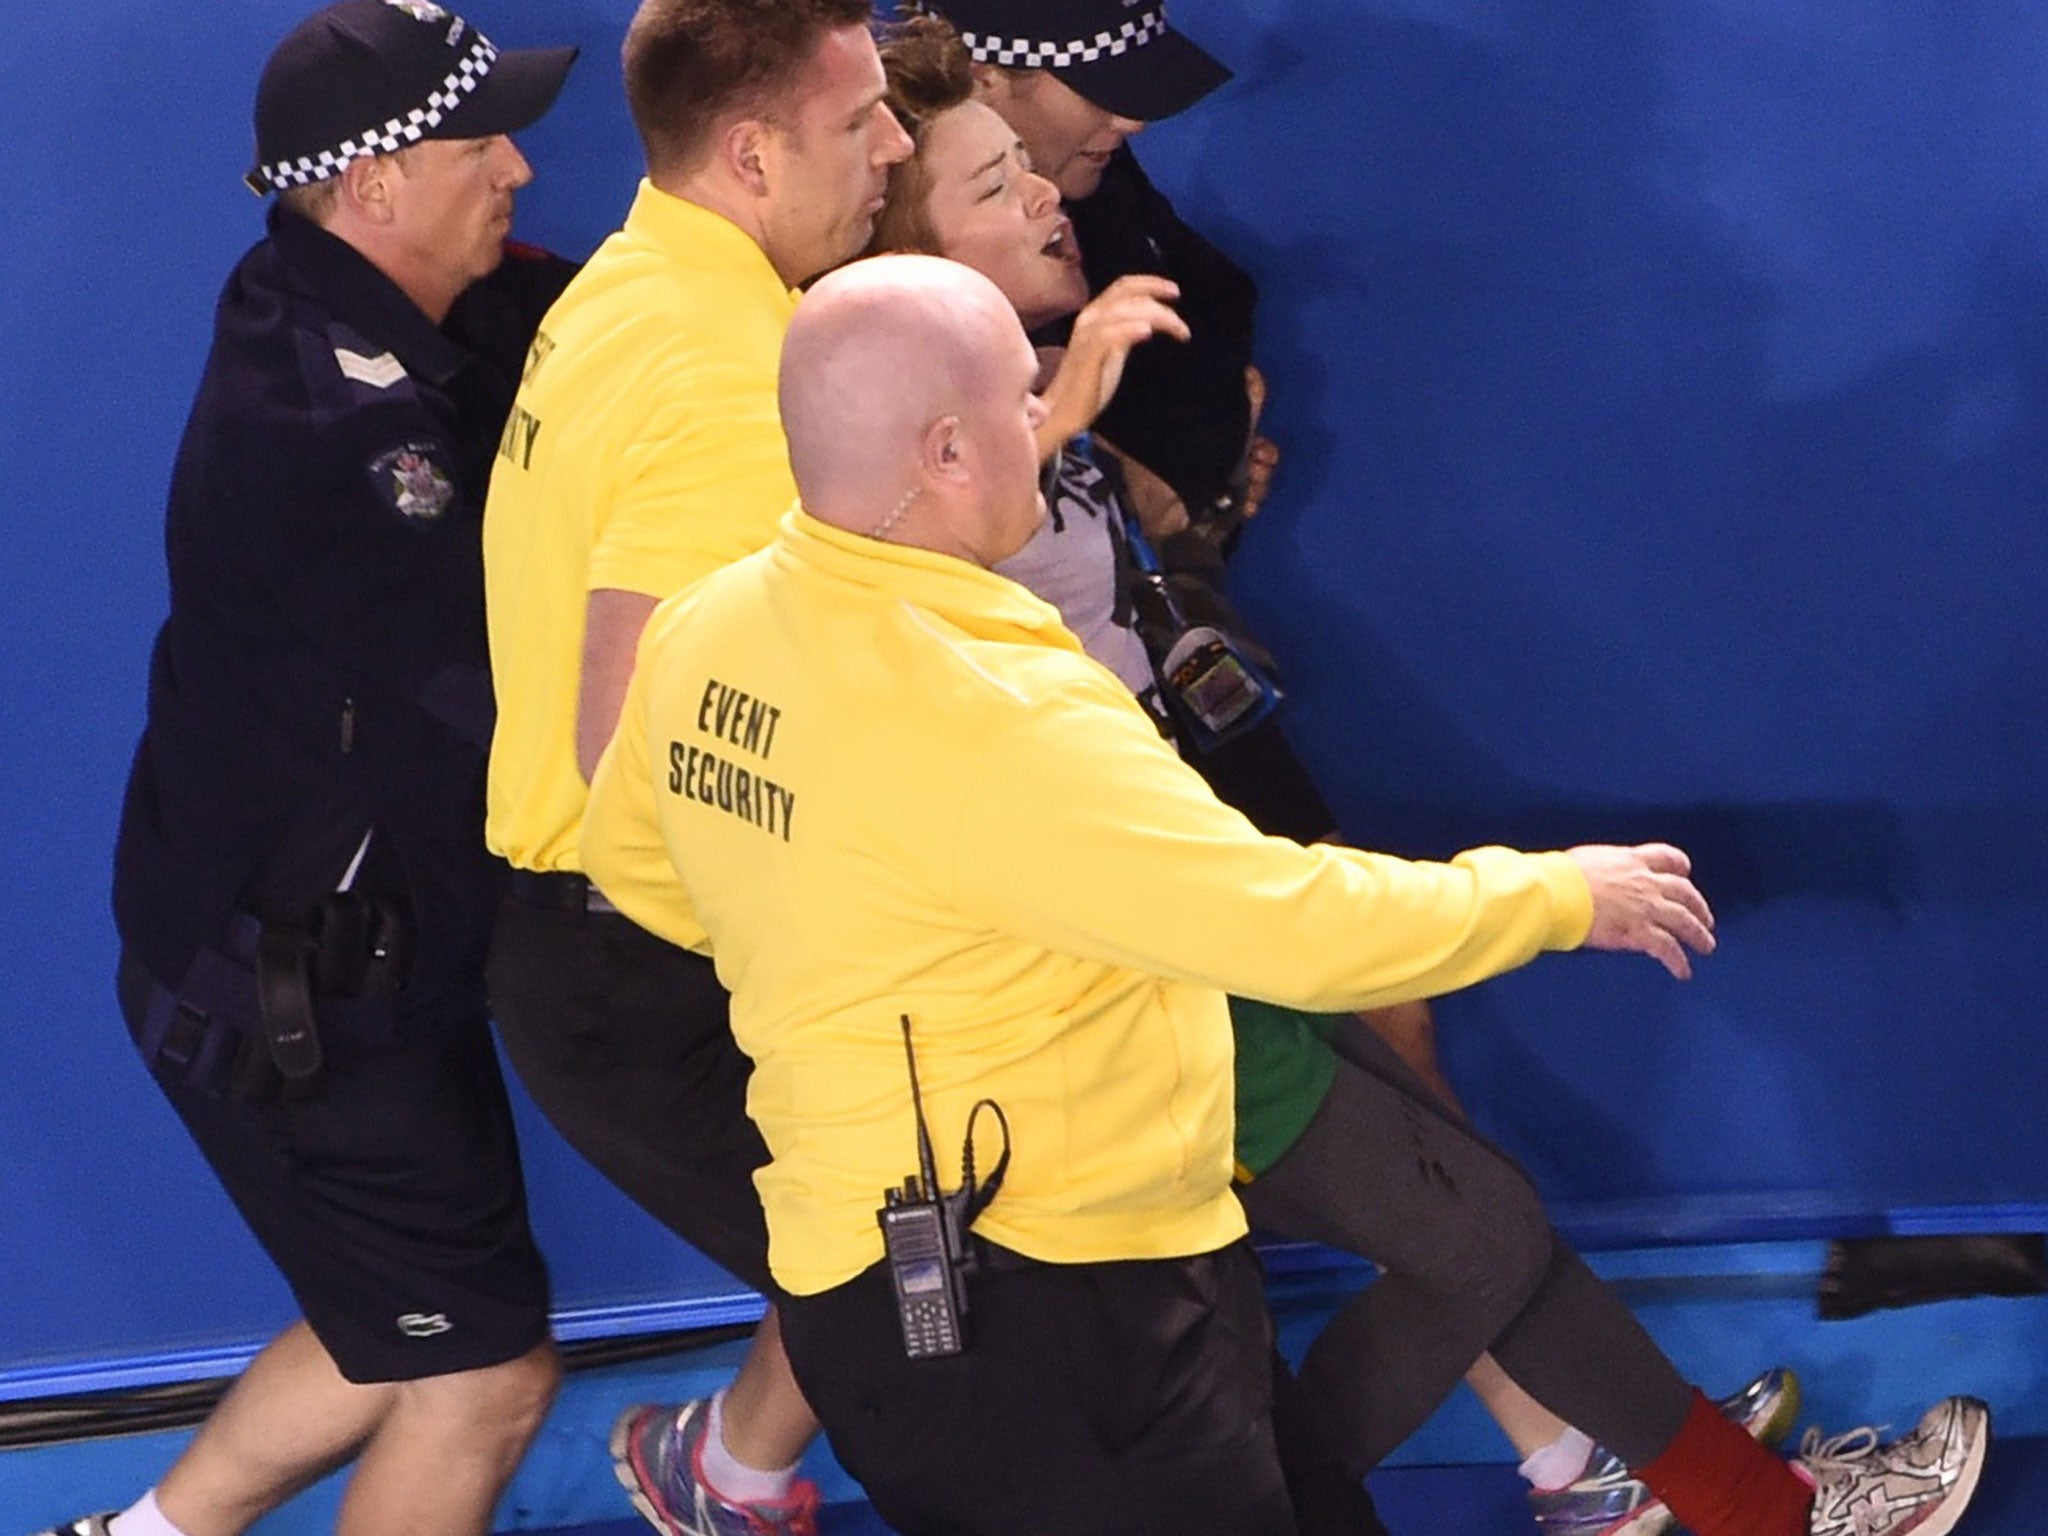 Security staff escort a protester out of the Rod Laver Arena